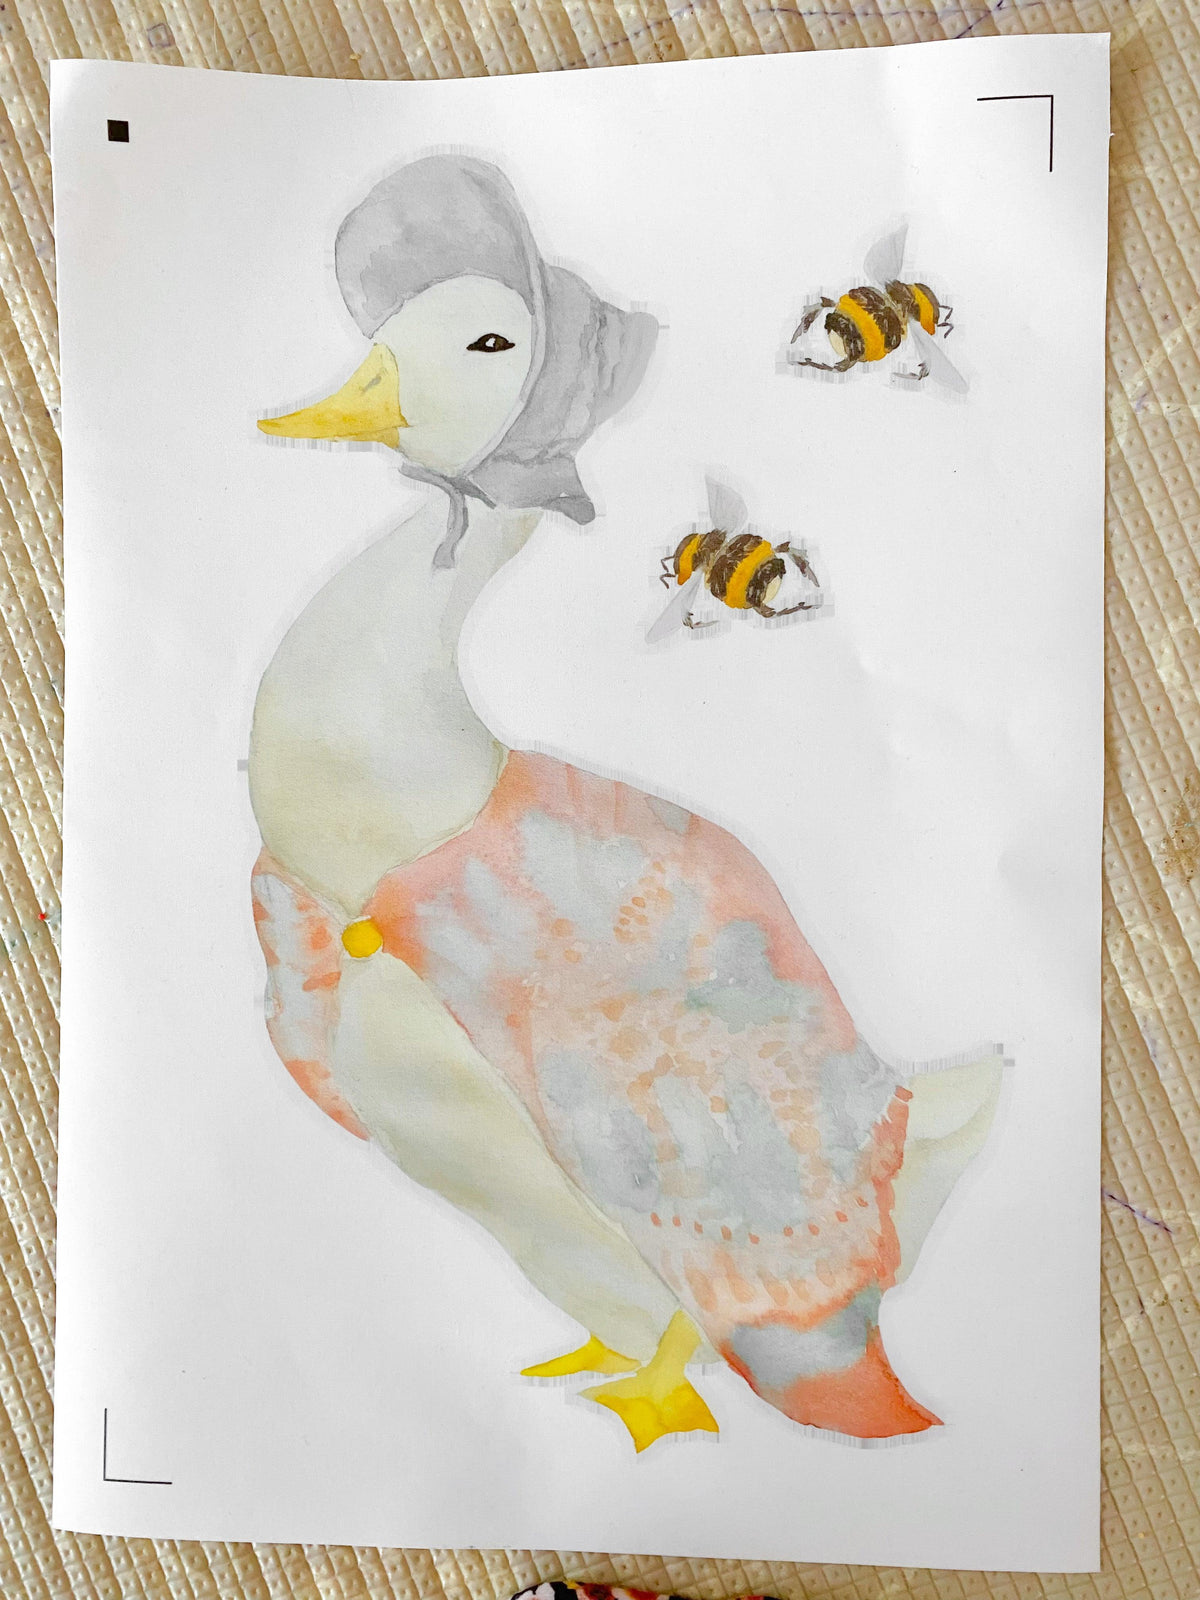 Jemima Puddleduck & Her Ducklings - Removable Fabric Wall Sticker Set - lovefrankieart